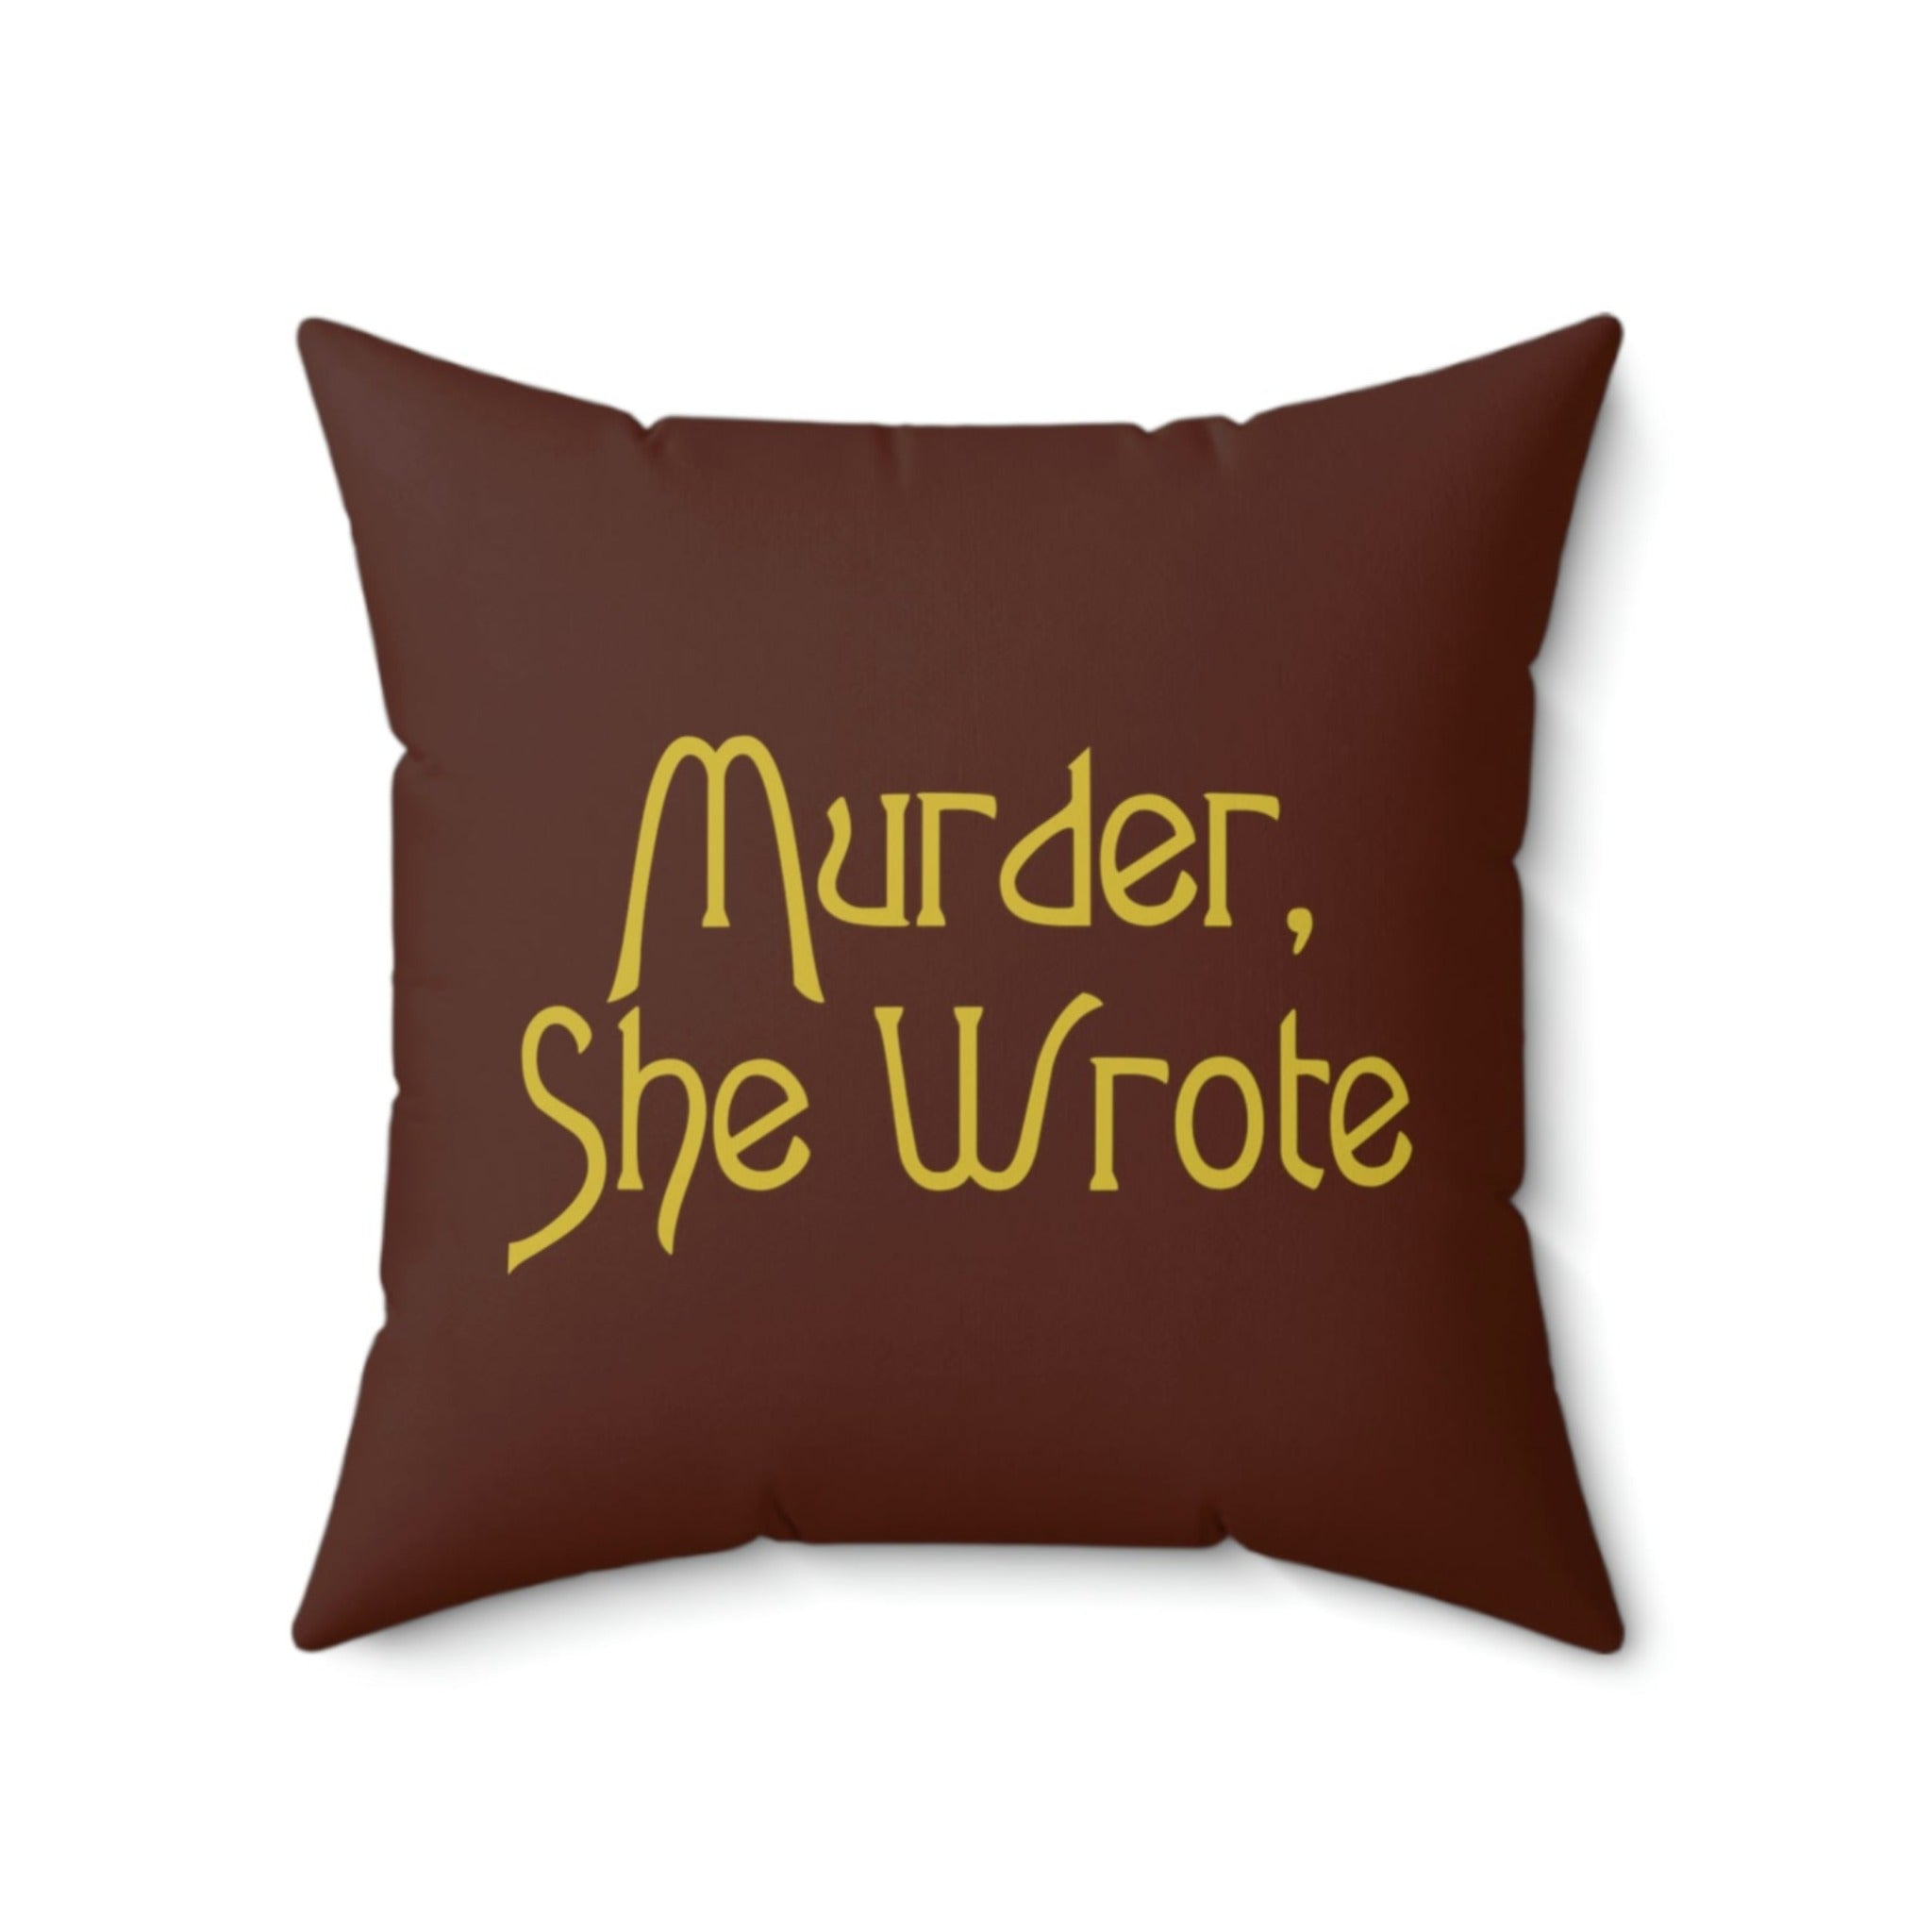 Murder she wrote faux suede pillow cover